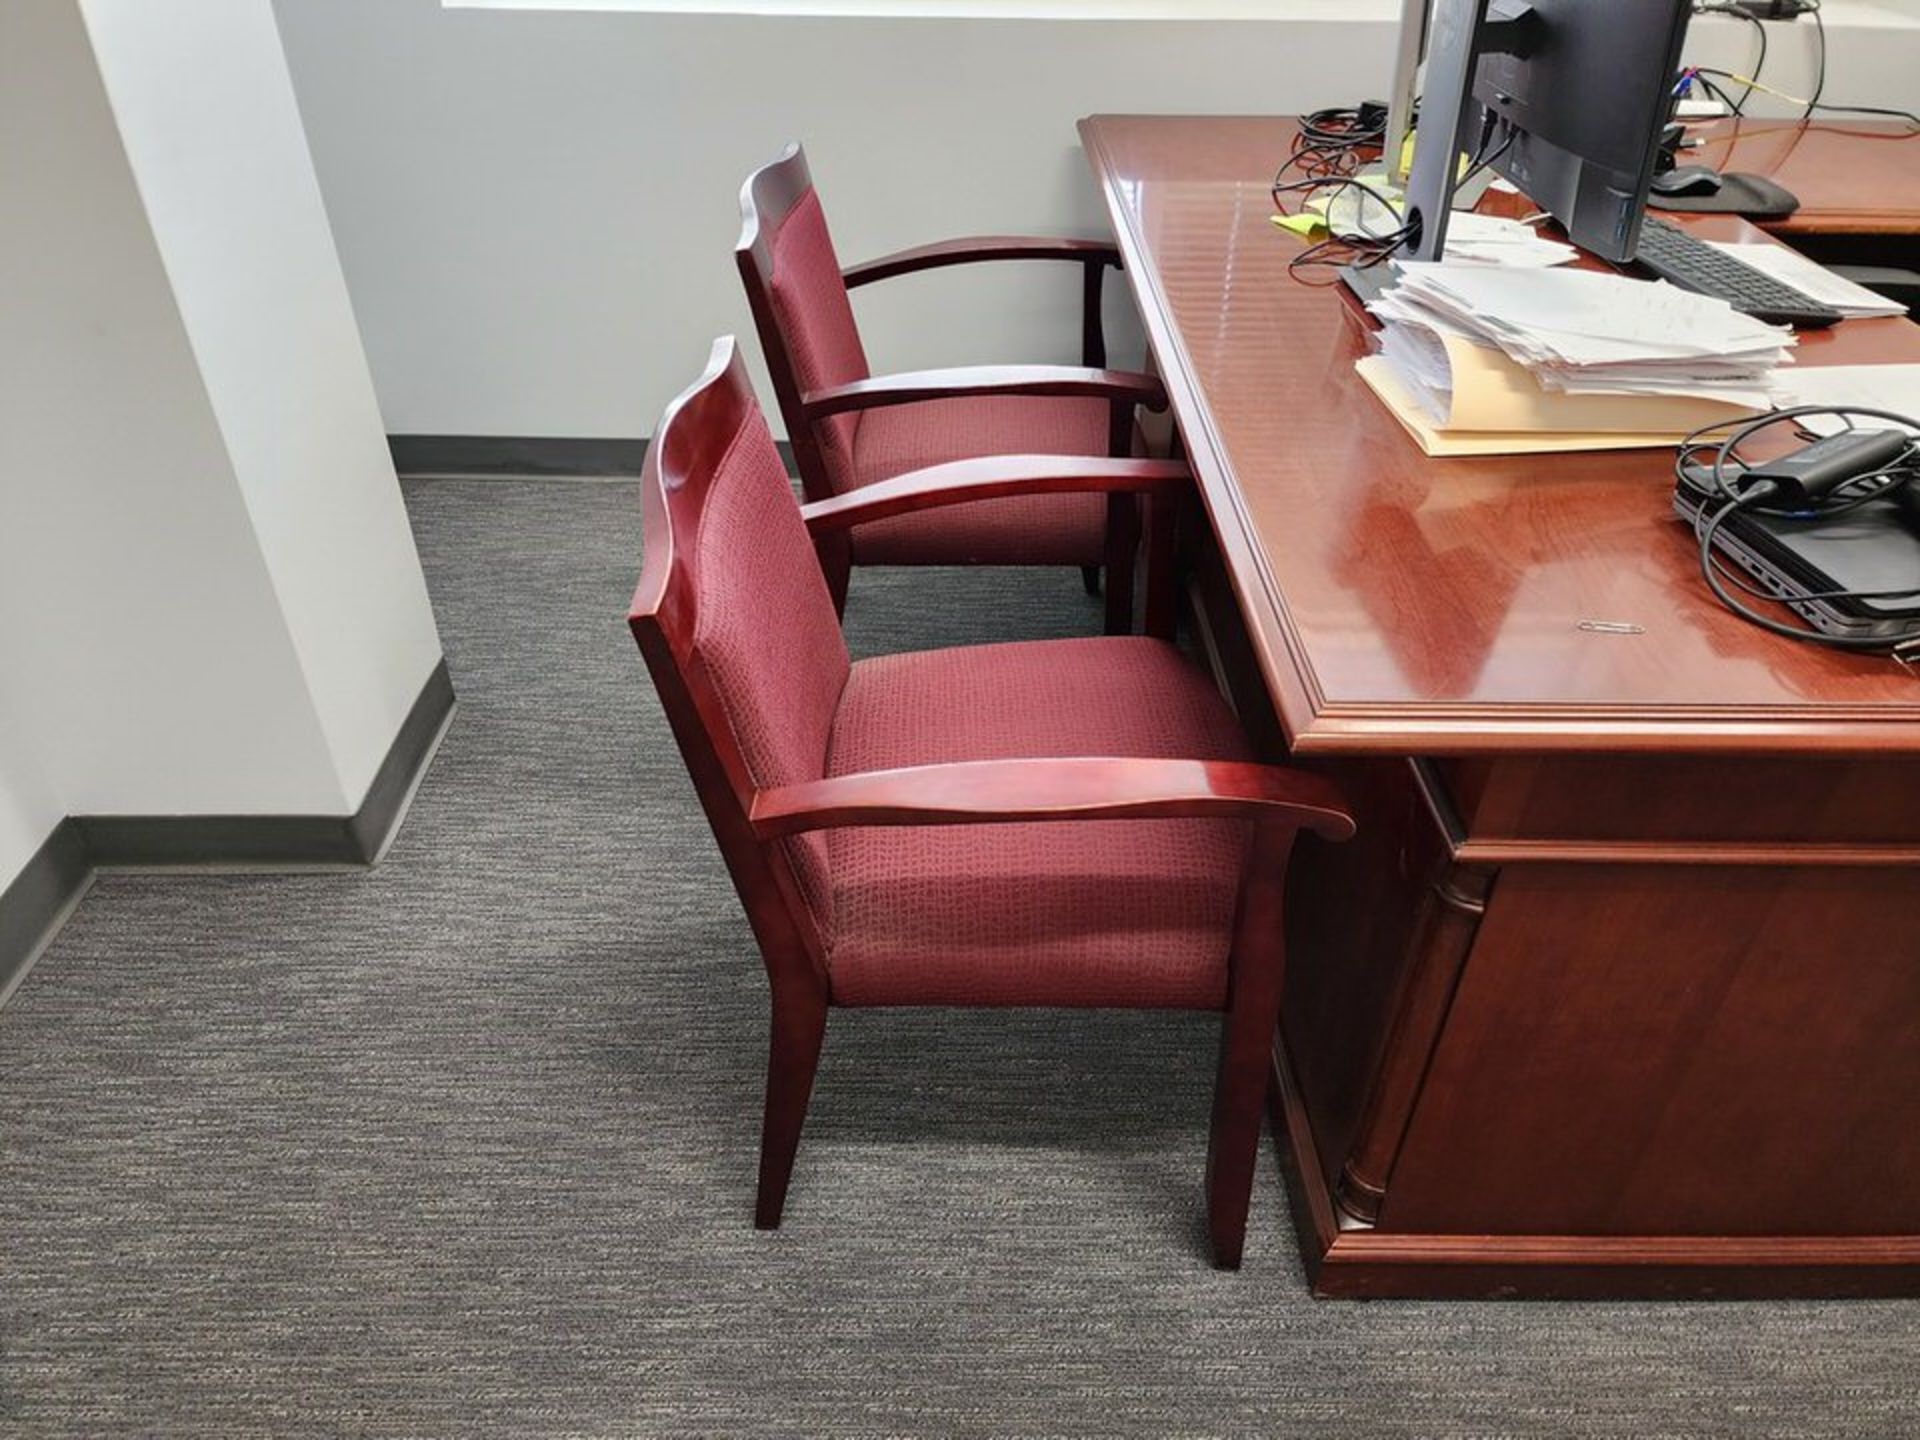 Office Furniture To Include But Not Limited To: Desk, Monitors, Keyboard & Mouse, etc. - Image 10 of 11